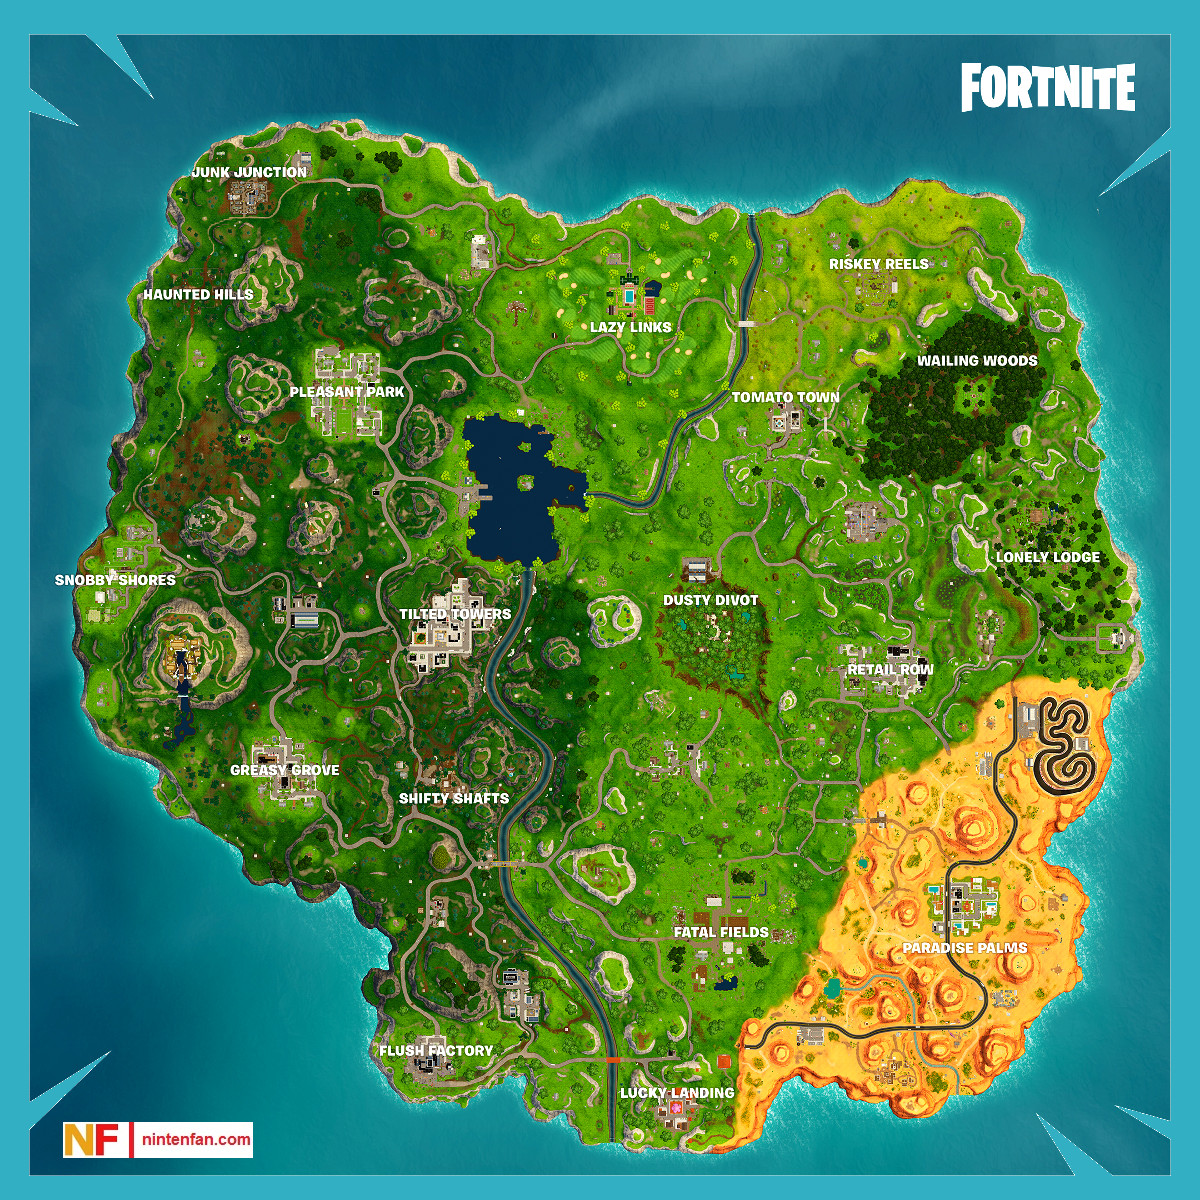 Fortnite Season 5, Newly Updated Map With Locations Marked - Nintenfan